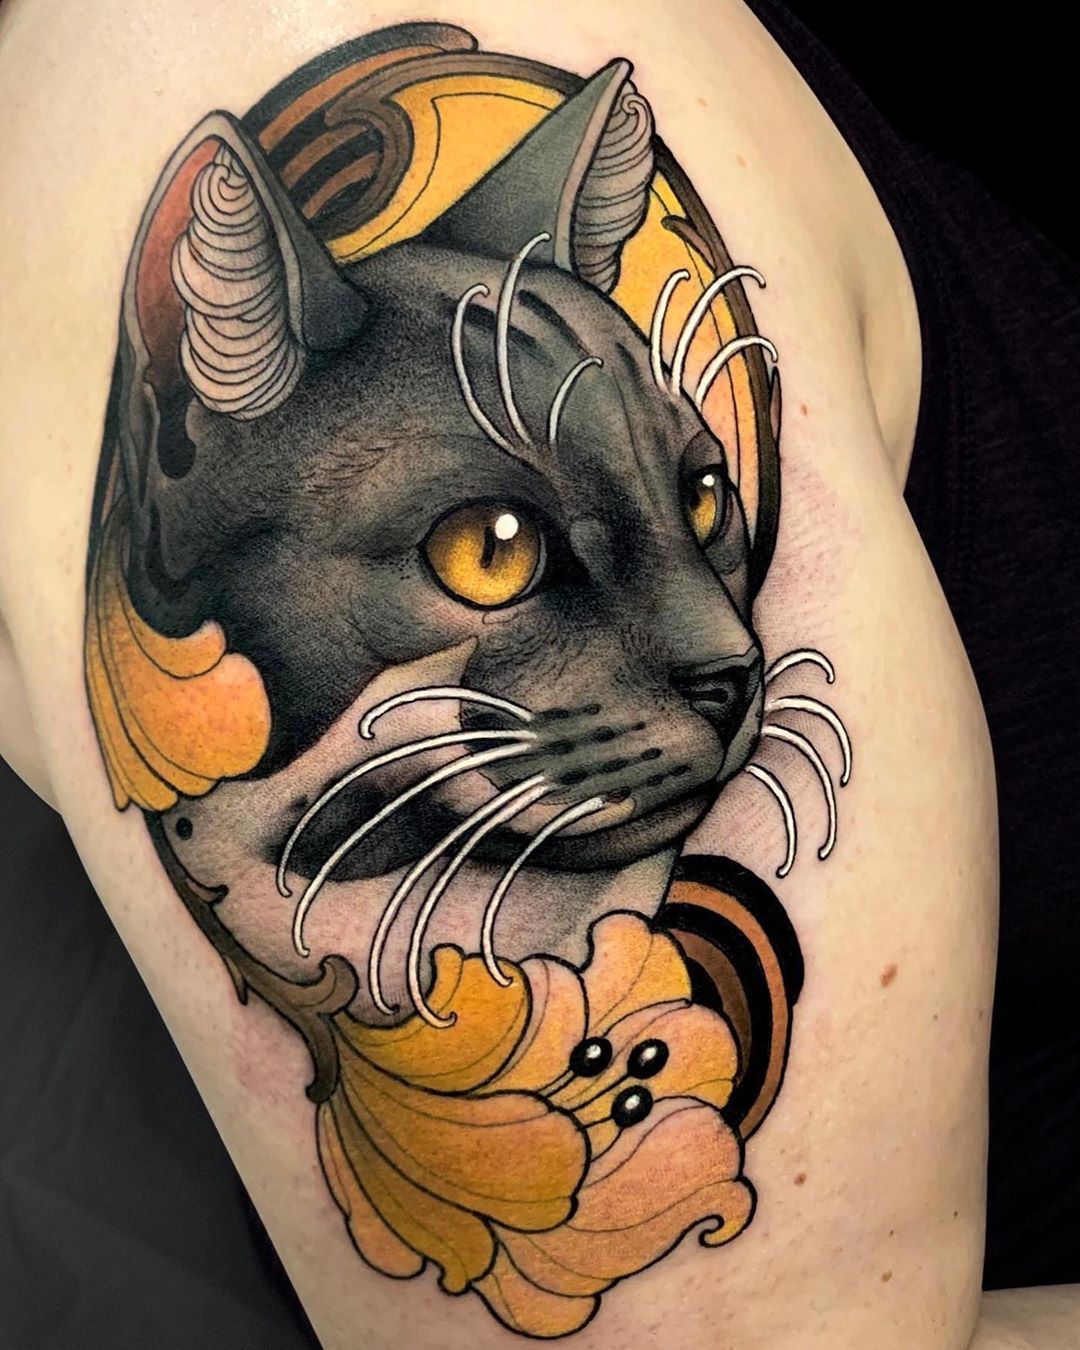 Killer Ink Tattoo on Twitter Awesome neotraditional cat by Nelli Nouveau  from Rebel With a Cause with Killer Ink tattoo supplies tattoo  neotraditionaltattoo neotradtattoo httpstcoLZ5hL9FU73  Twitter